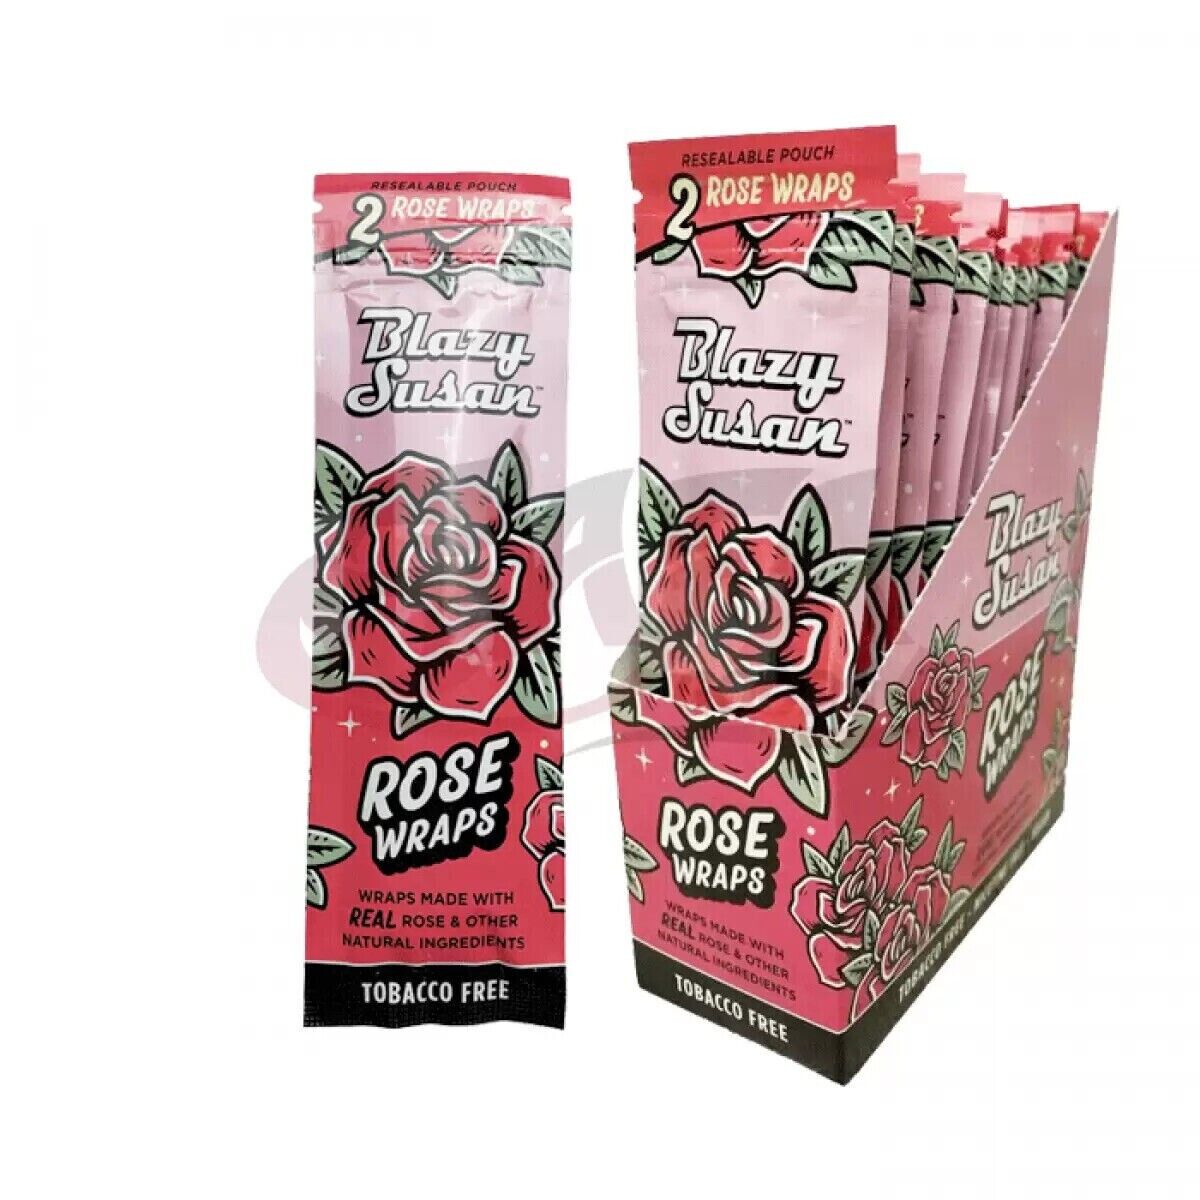 Authentic Blazy Susan Rose Pre-Rolls Wraps 5 Packs Made with Real Rose 10 total